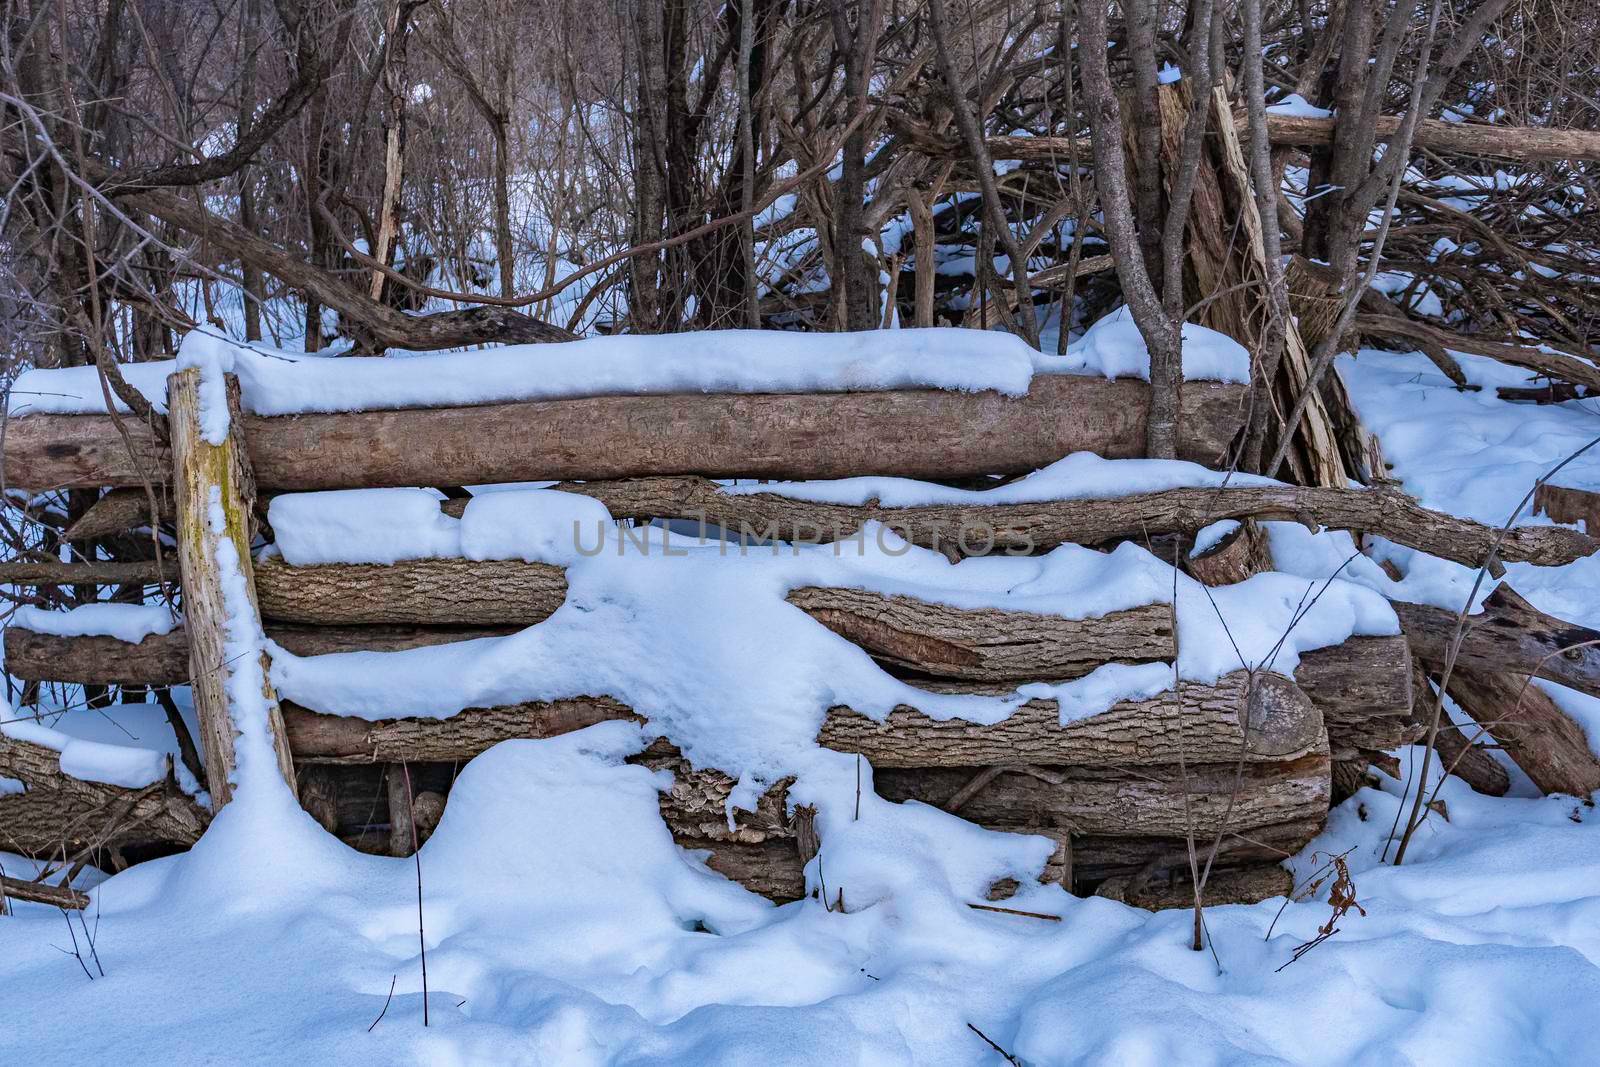 Firewood harvested for the winter stacked near the path, covered with snow